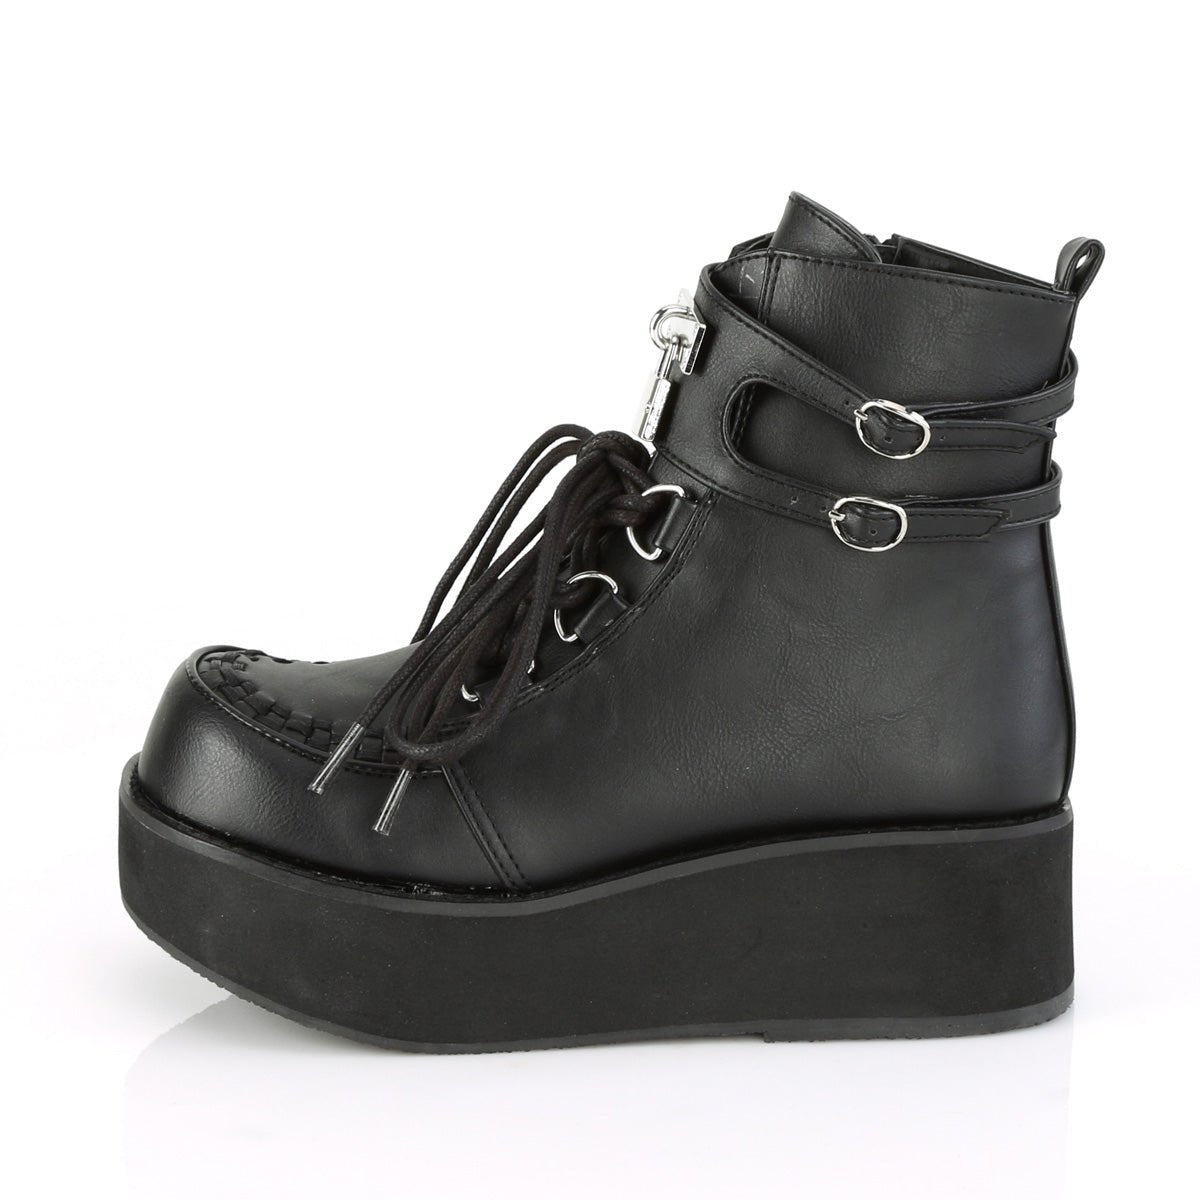 Too Fast | Demonia Sprite 70 | Black Vegan Leather Women's Ankle Boots